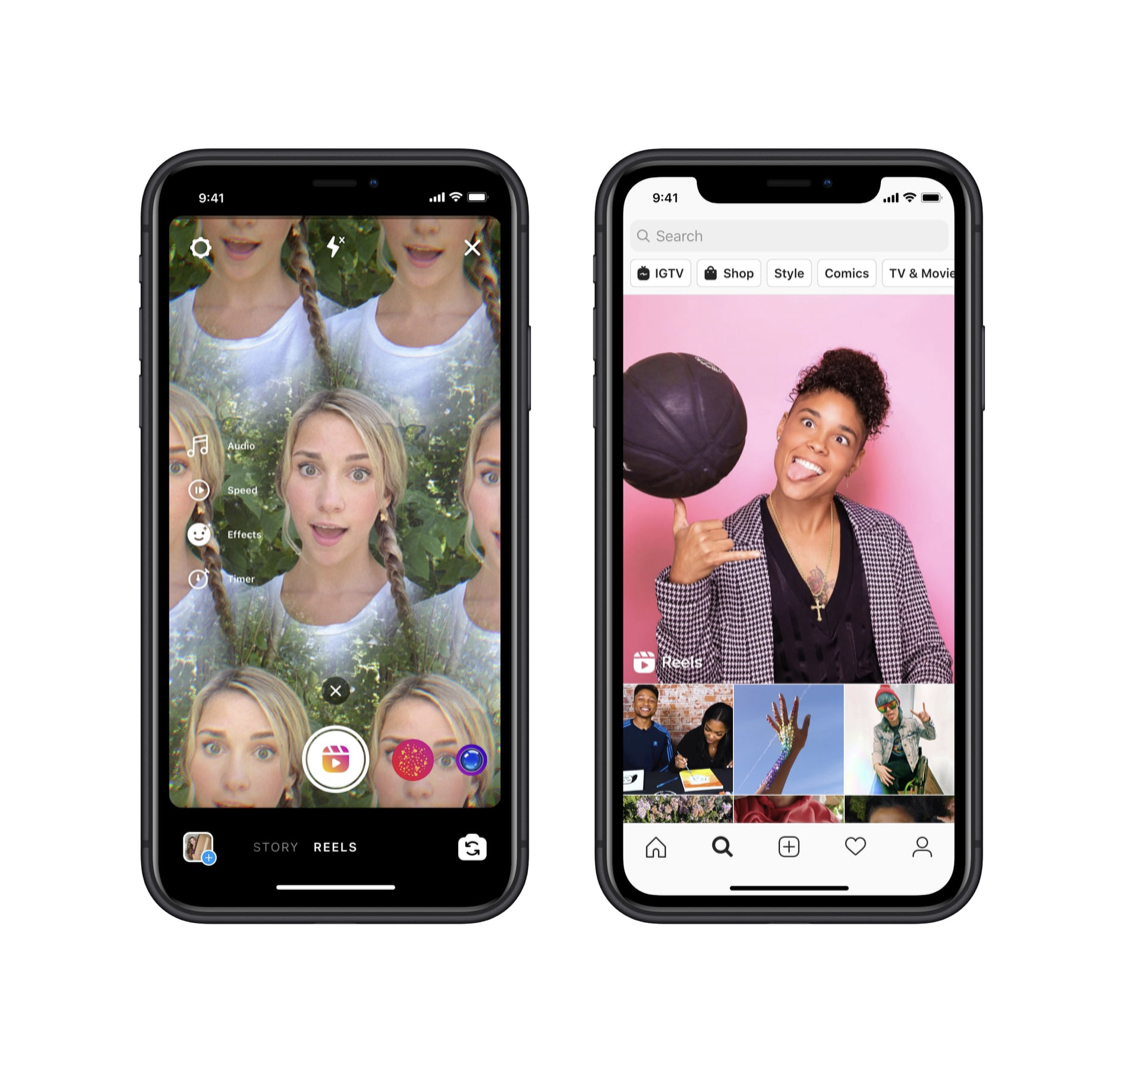 Instagram introduces 'Reels' to its users amid talk of a possible TikTok ban in the US 1